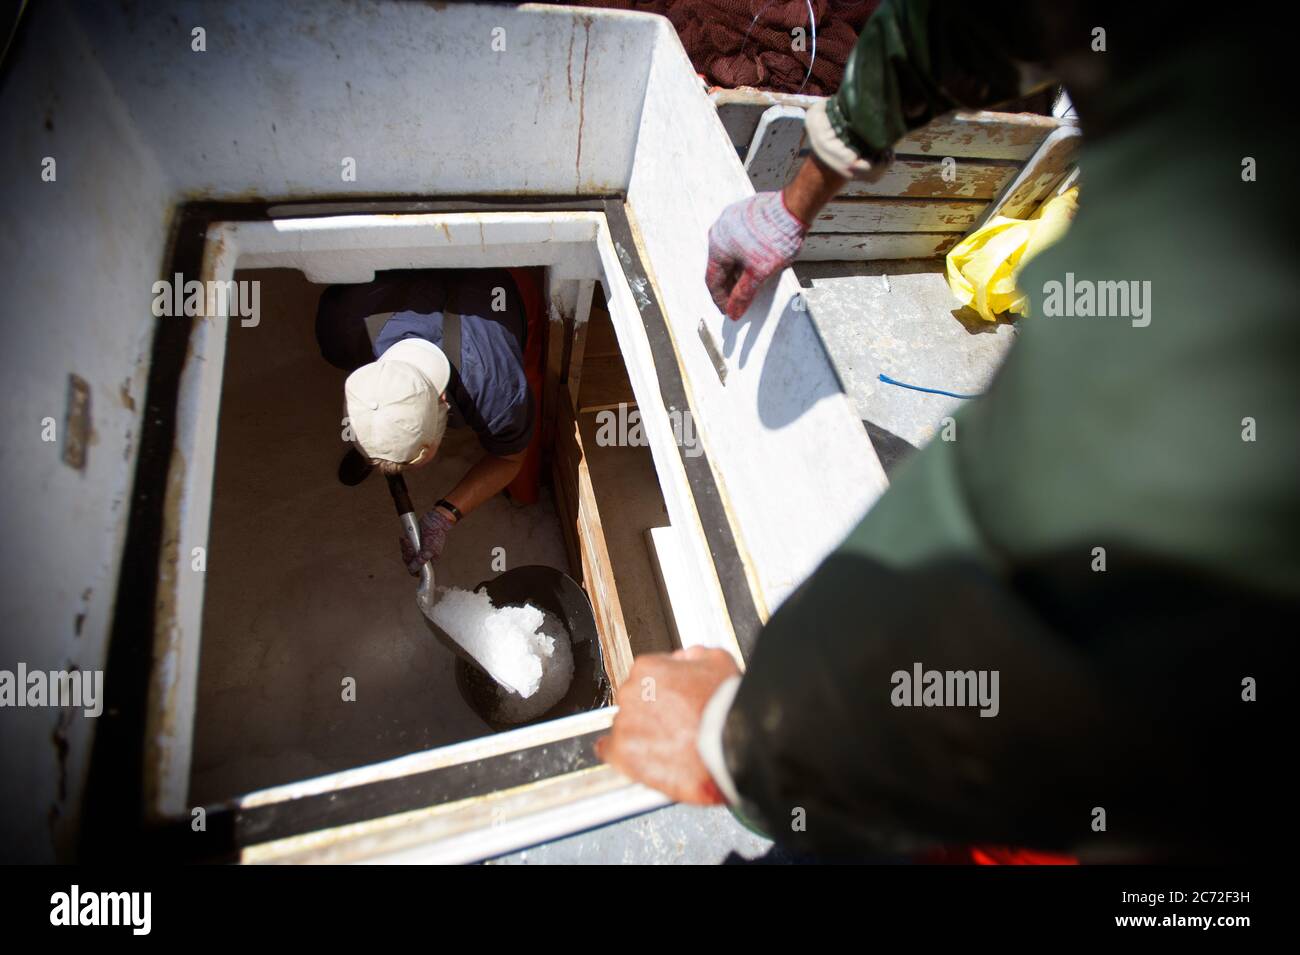 José Luís Ribella (a.k.a Cosco), fisherman of the Fernandez y Moreno fishing boat, fills a basket with ice to preserve a bluefin tuna (Thunnus thynnus) until the arrival of the boat to port. Stock Photo